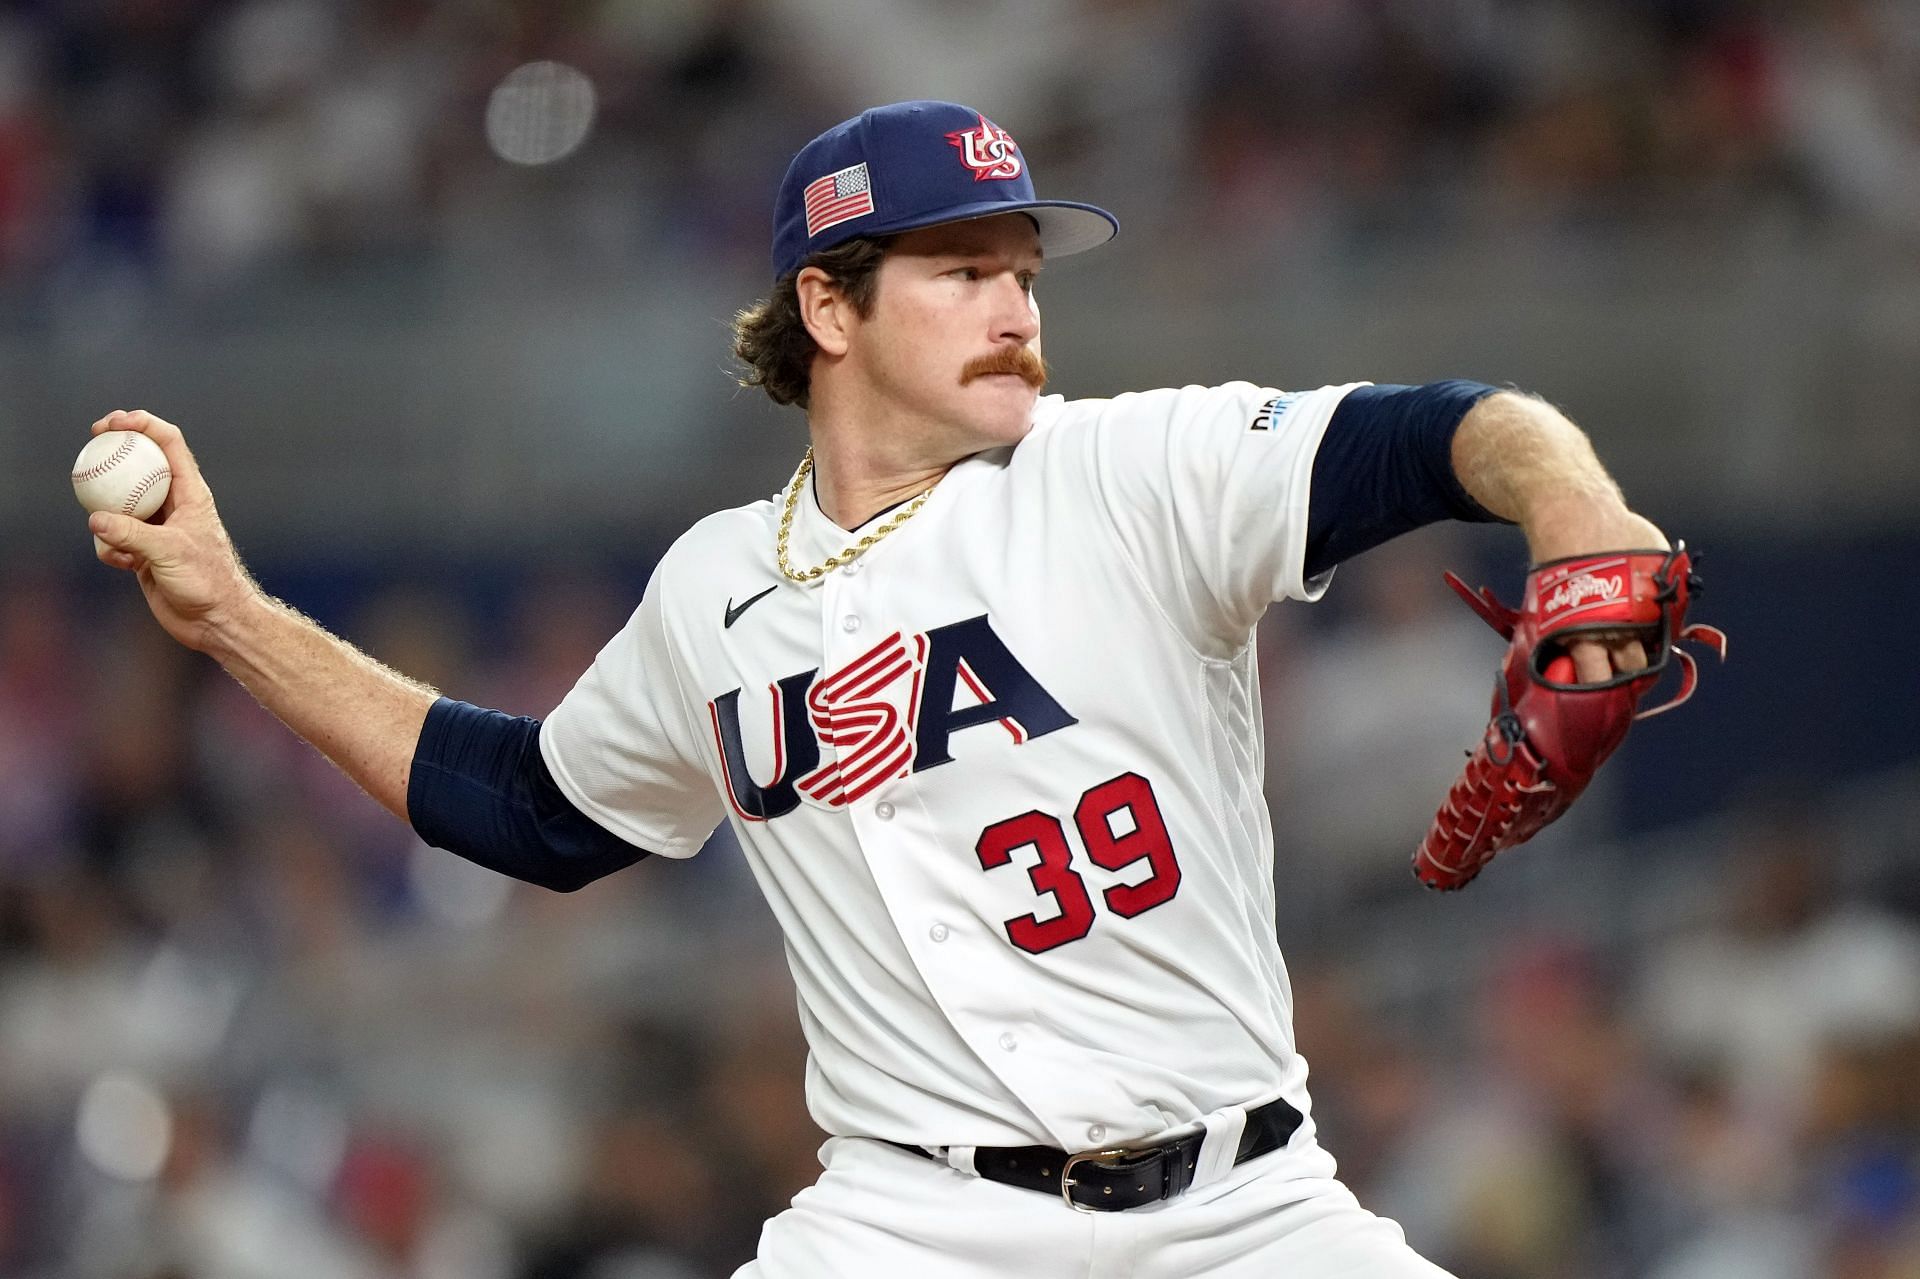 Fans raving about Miles Mikolas' fantastic performance in WBC